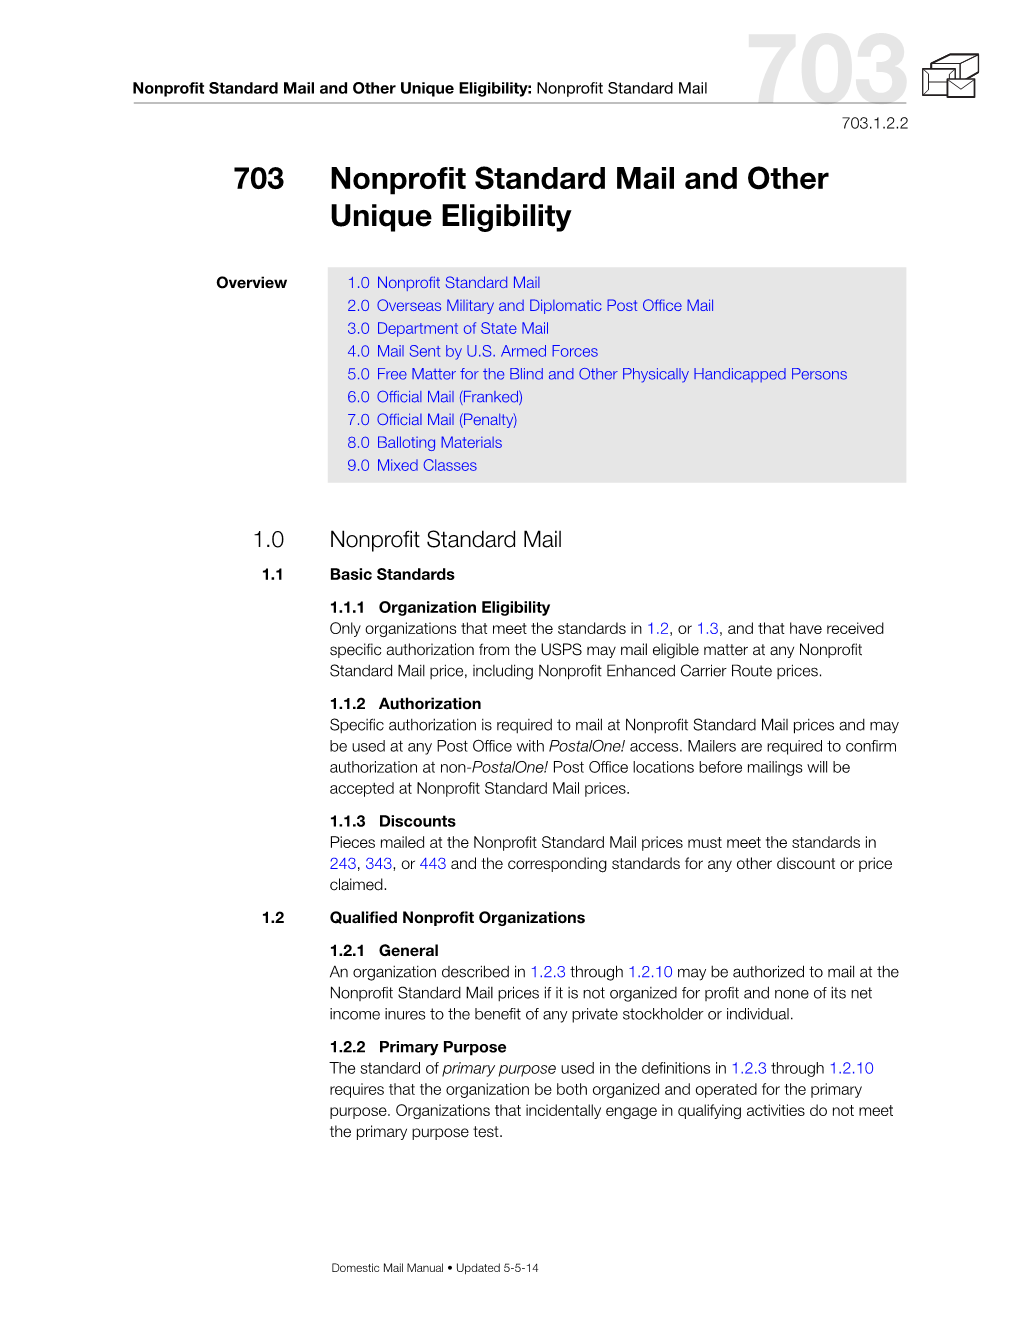 DMM 703 Nonprofit Standard Mail and Other Unique Eligibility